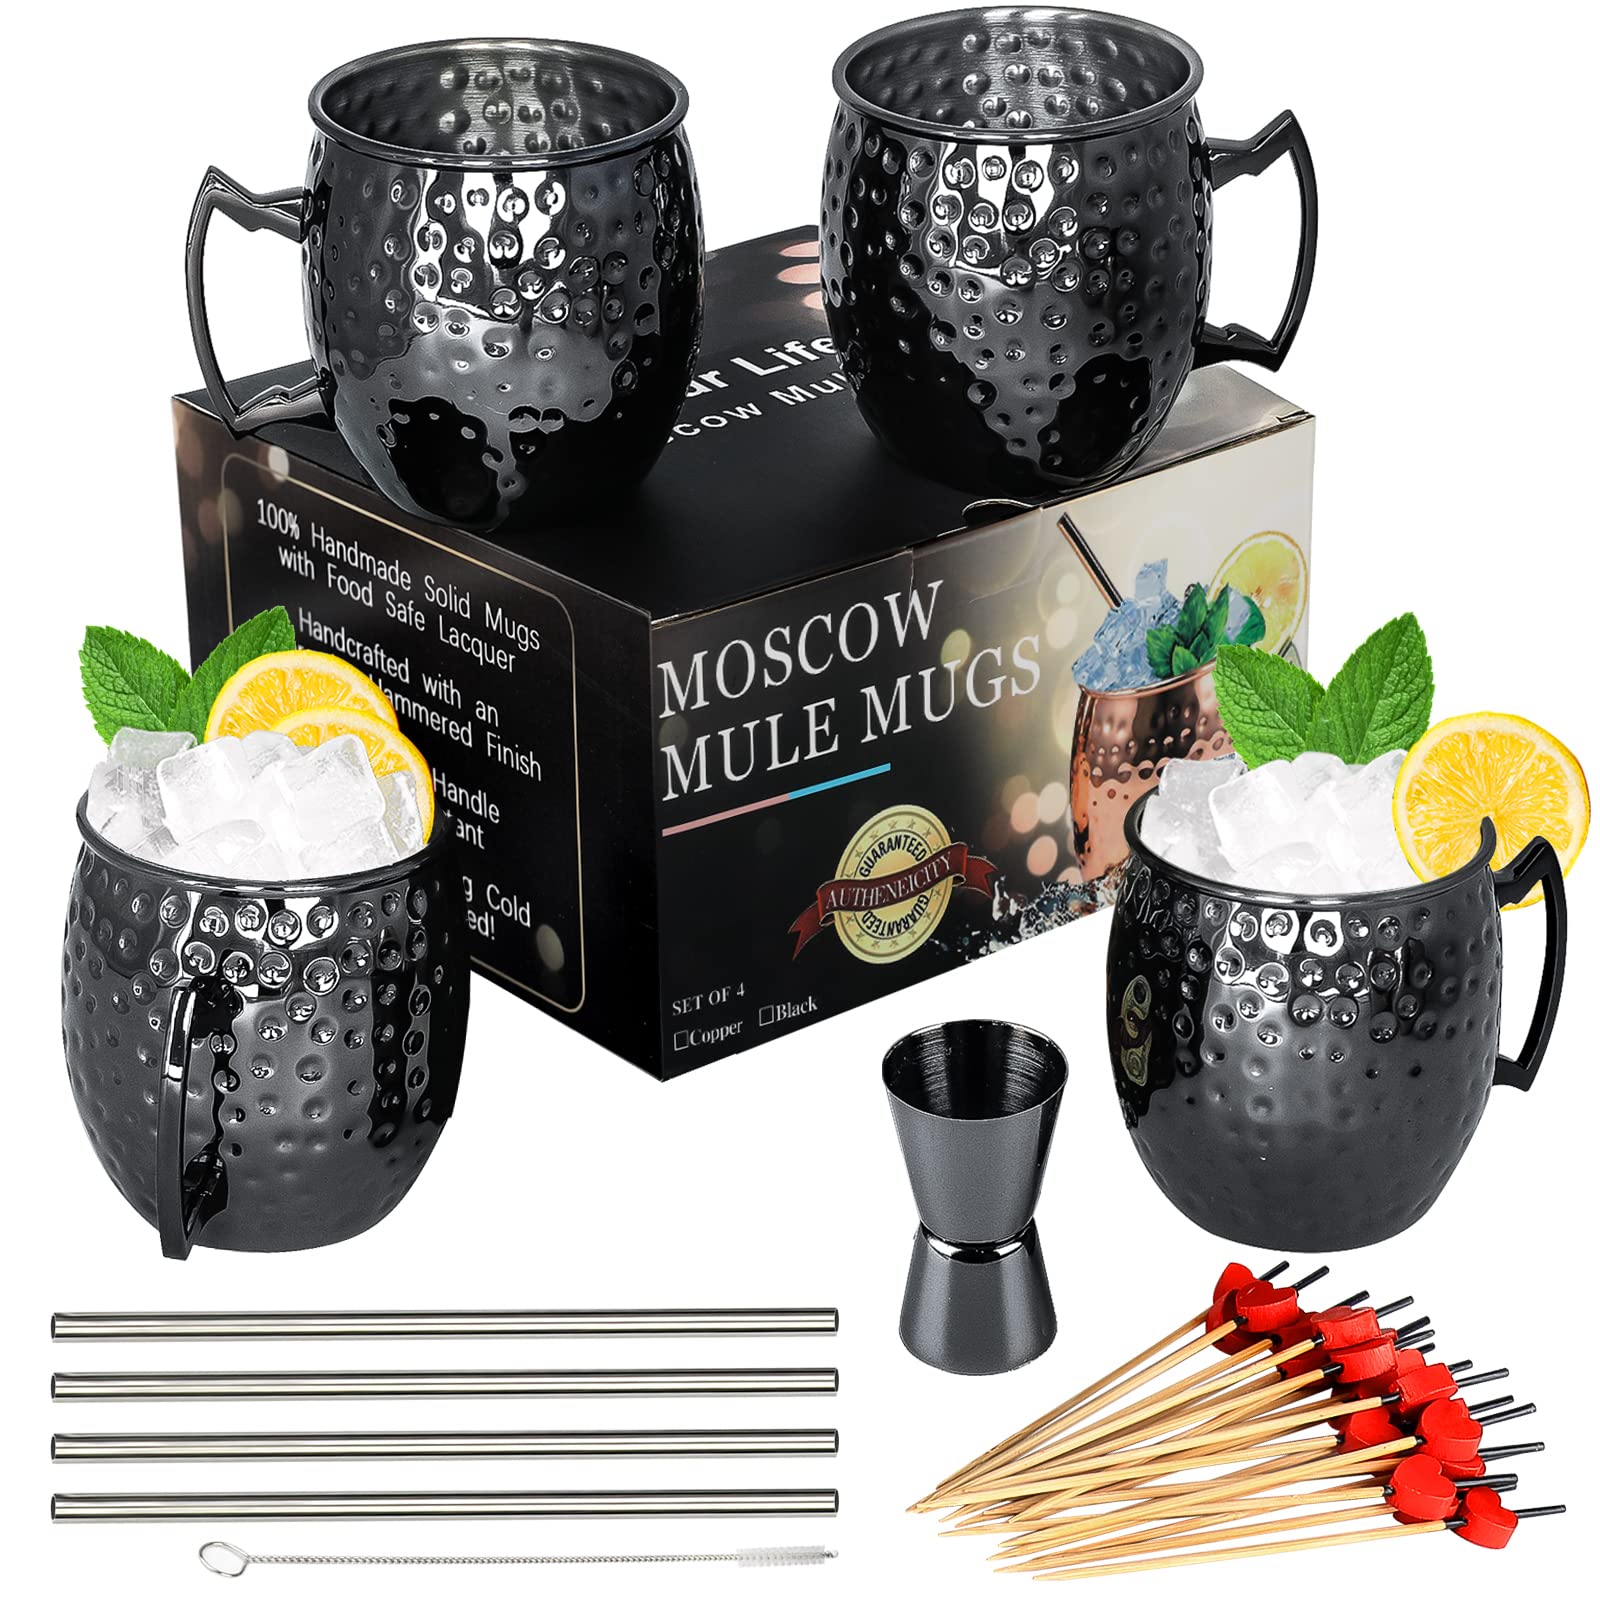 LINALL Moscow Mule Mugs- Set of 4 gunmetal Black Plated Stainless Steel Mug 18oz, Measuring cup, cocktail Picks for chilled Drinks (4pc